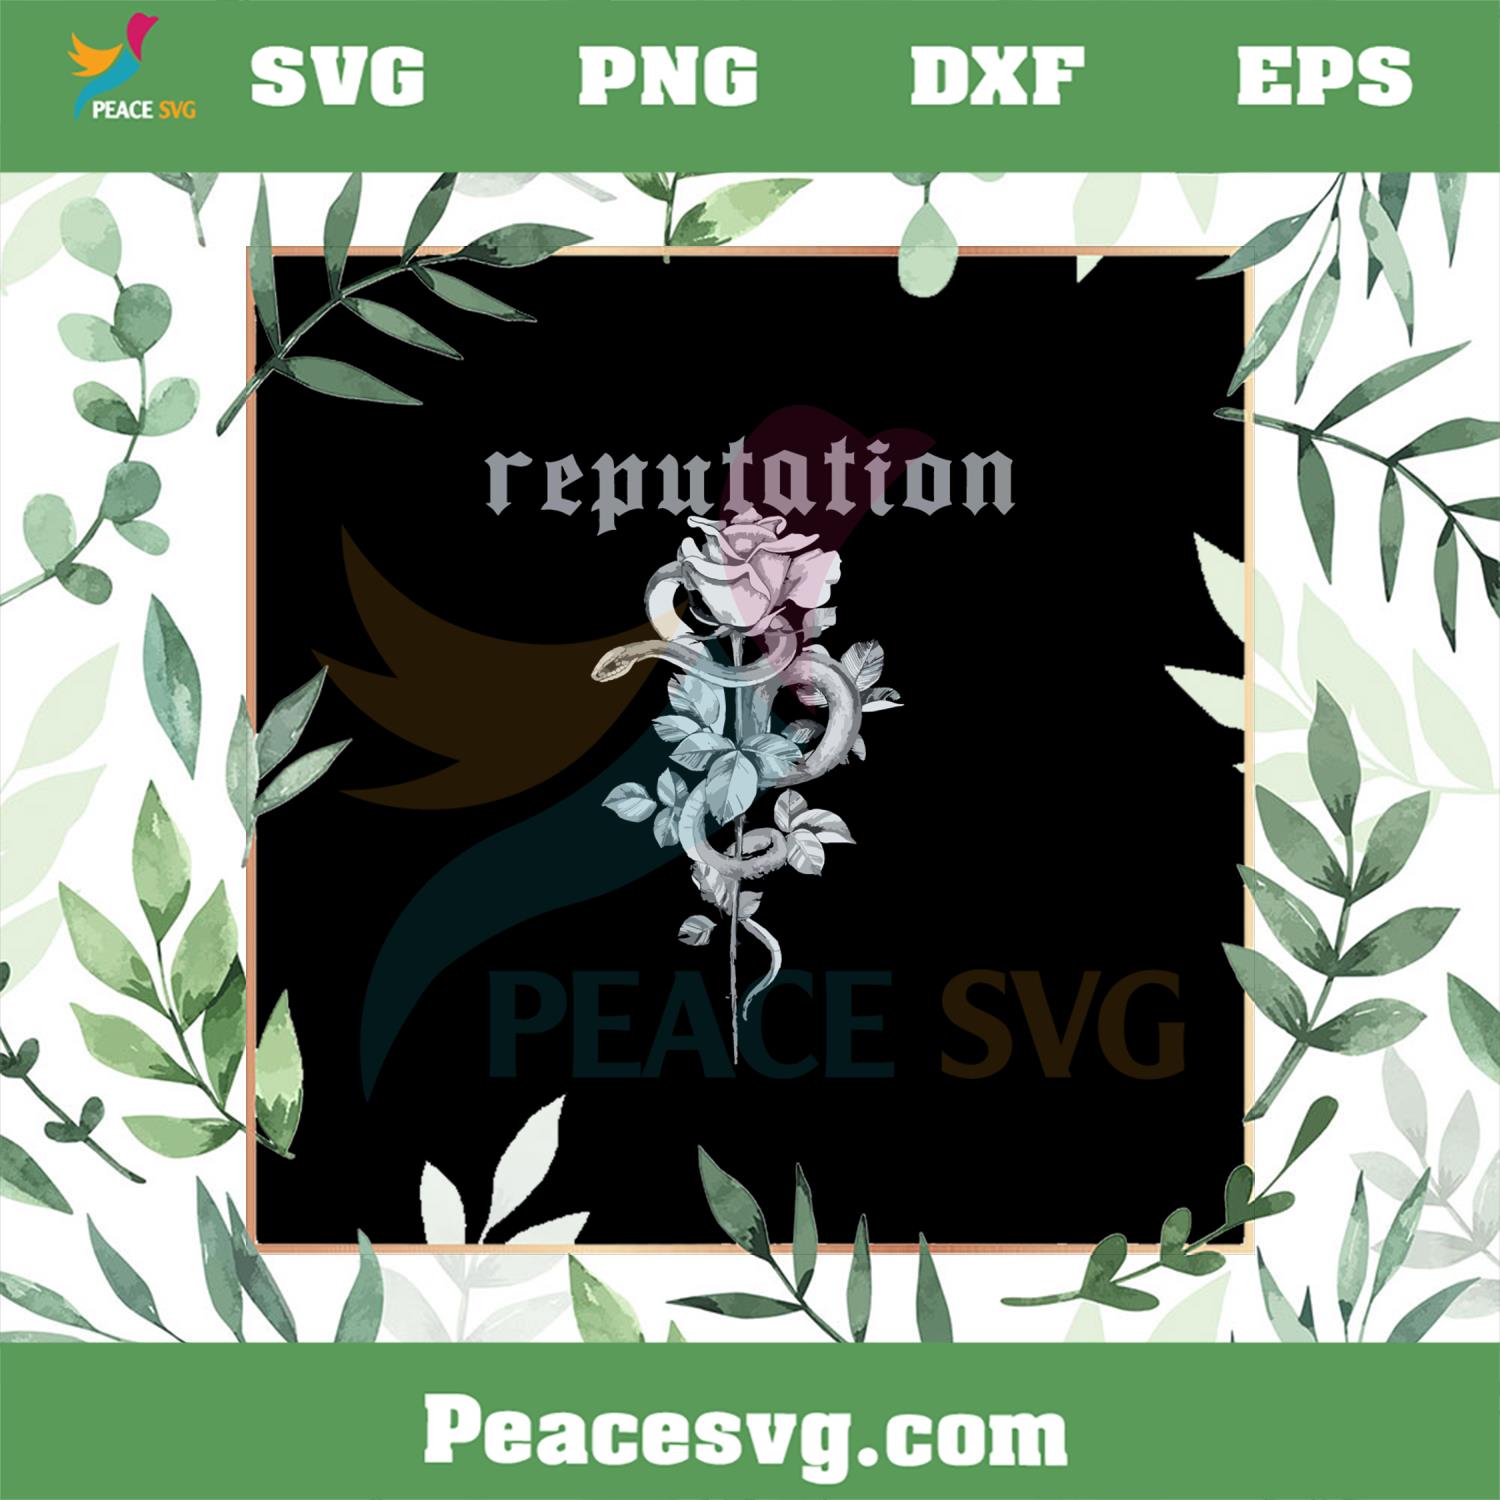 Reputation Snake Song Taylor Swift Fans SVG Cutting Files